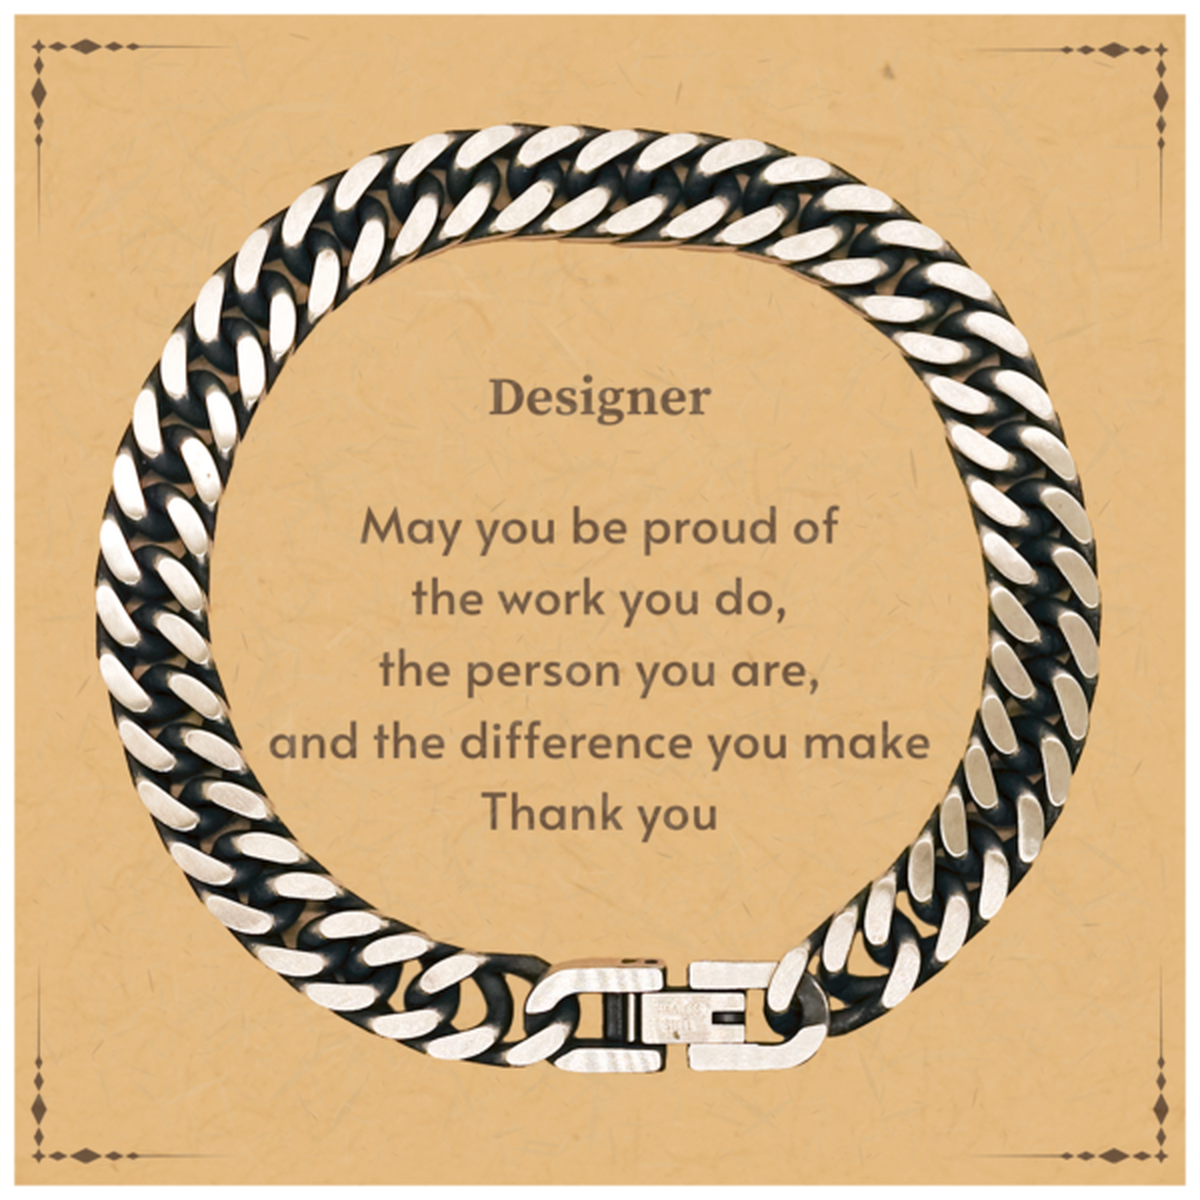 Heartwarming Cuban Link Chain Bracelet Retirement Coworkers Gifts for Designer, Designer May You be proud of the work you do, the person you are Gifts for Boss Men Women Friends